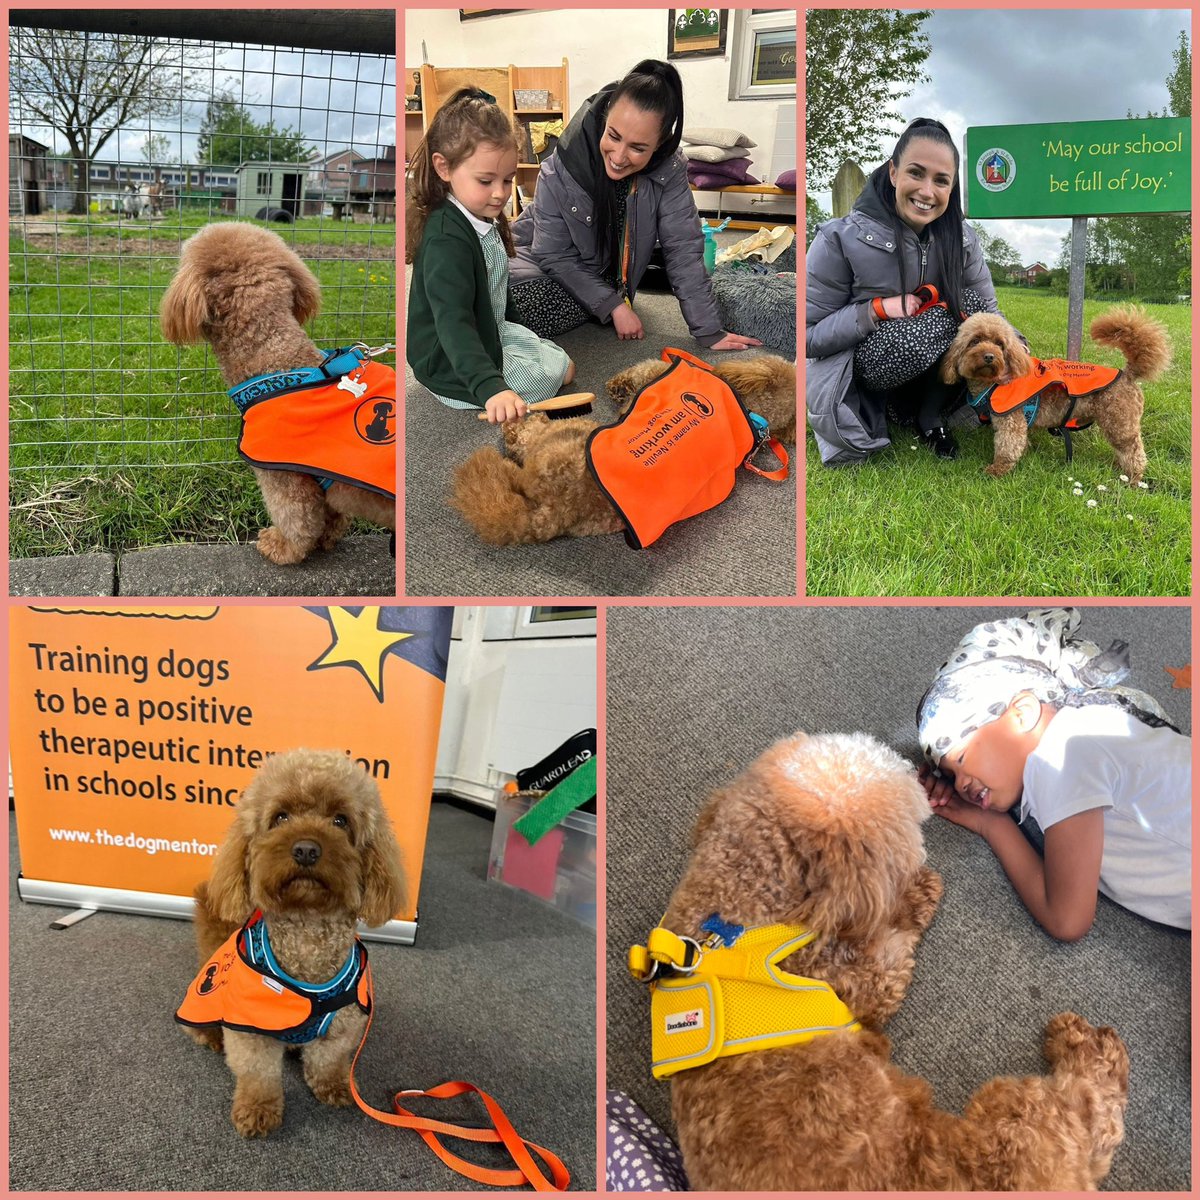 We have some very exciting news! 🐾 My cavapoo Neville has passed his training to be our new @TheDogMentorUK at SJSB! He can’t wait to read, go on walks and join interventions with the children 🥰🐾🐩 @StJosephStBede @STOC_CAT #SJSBSchoolDog